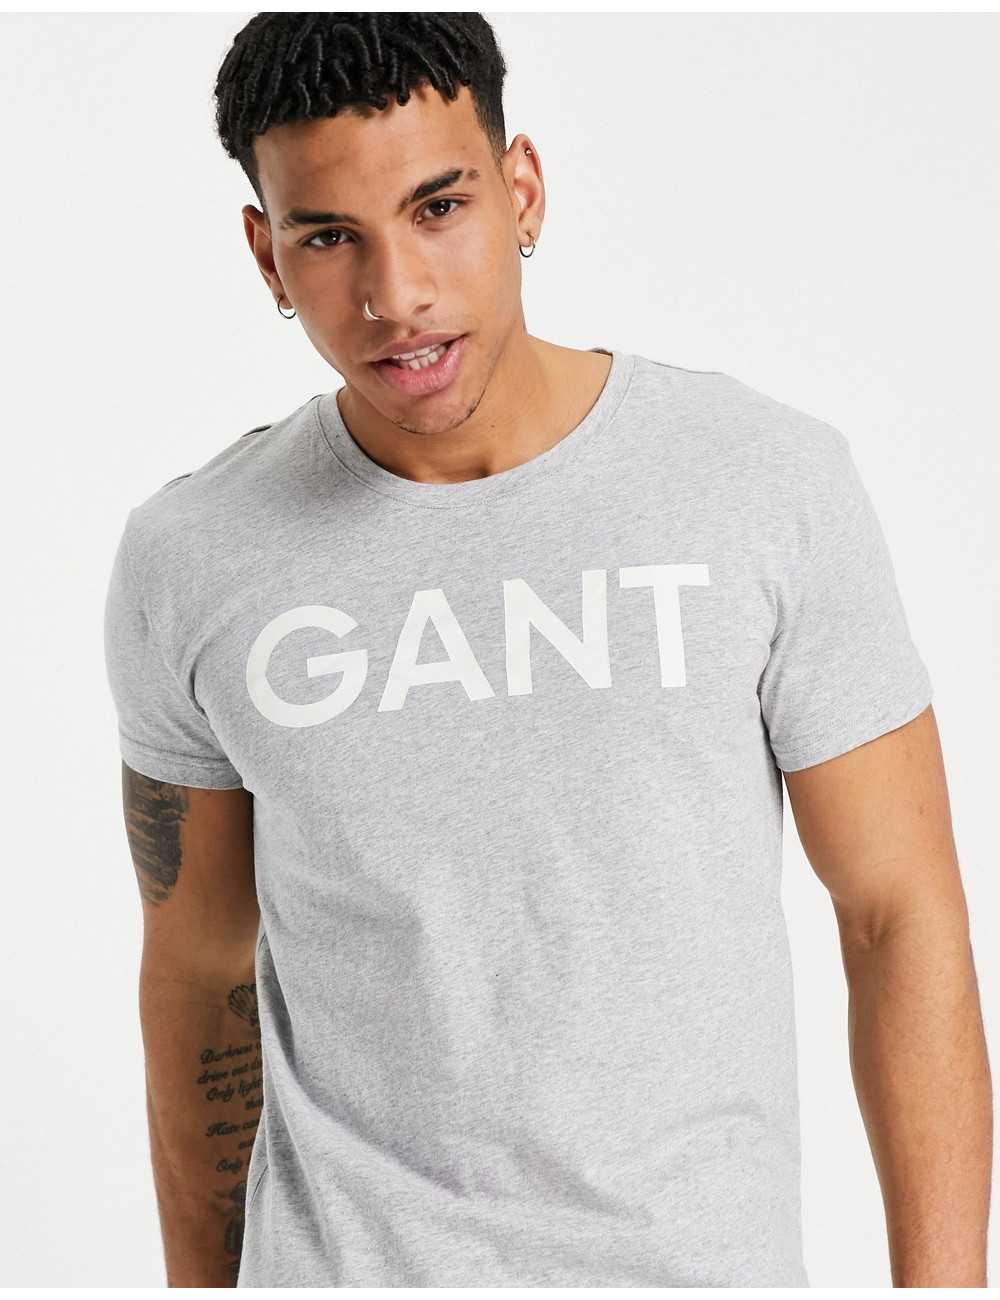 GANT t-shirt in grey with...